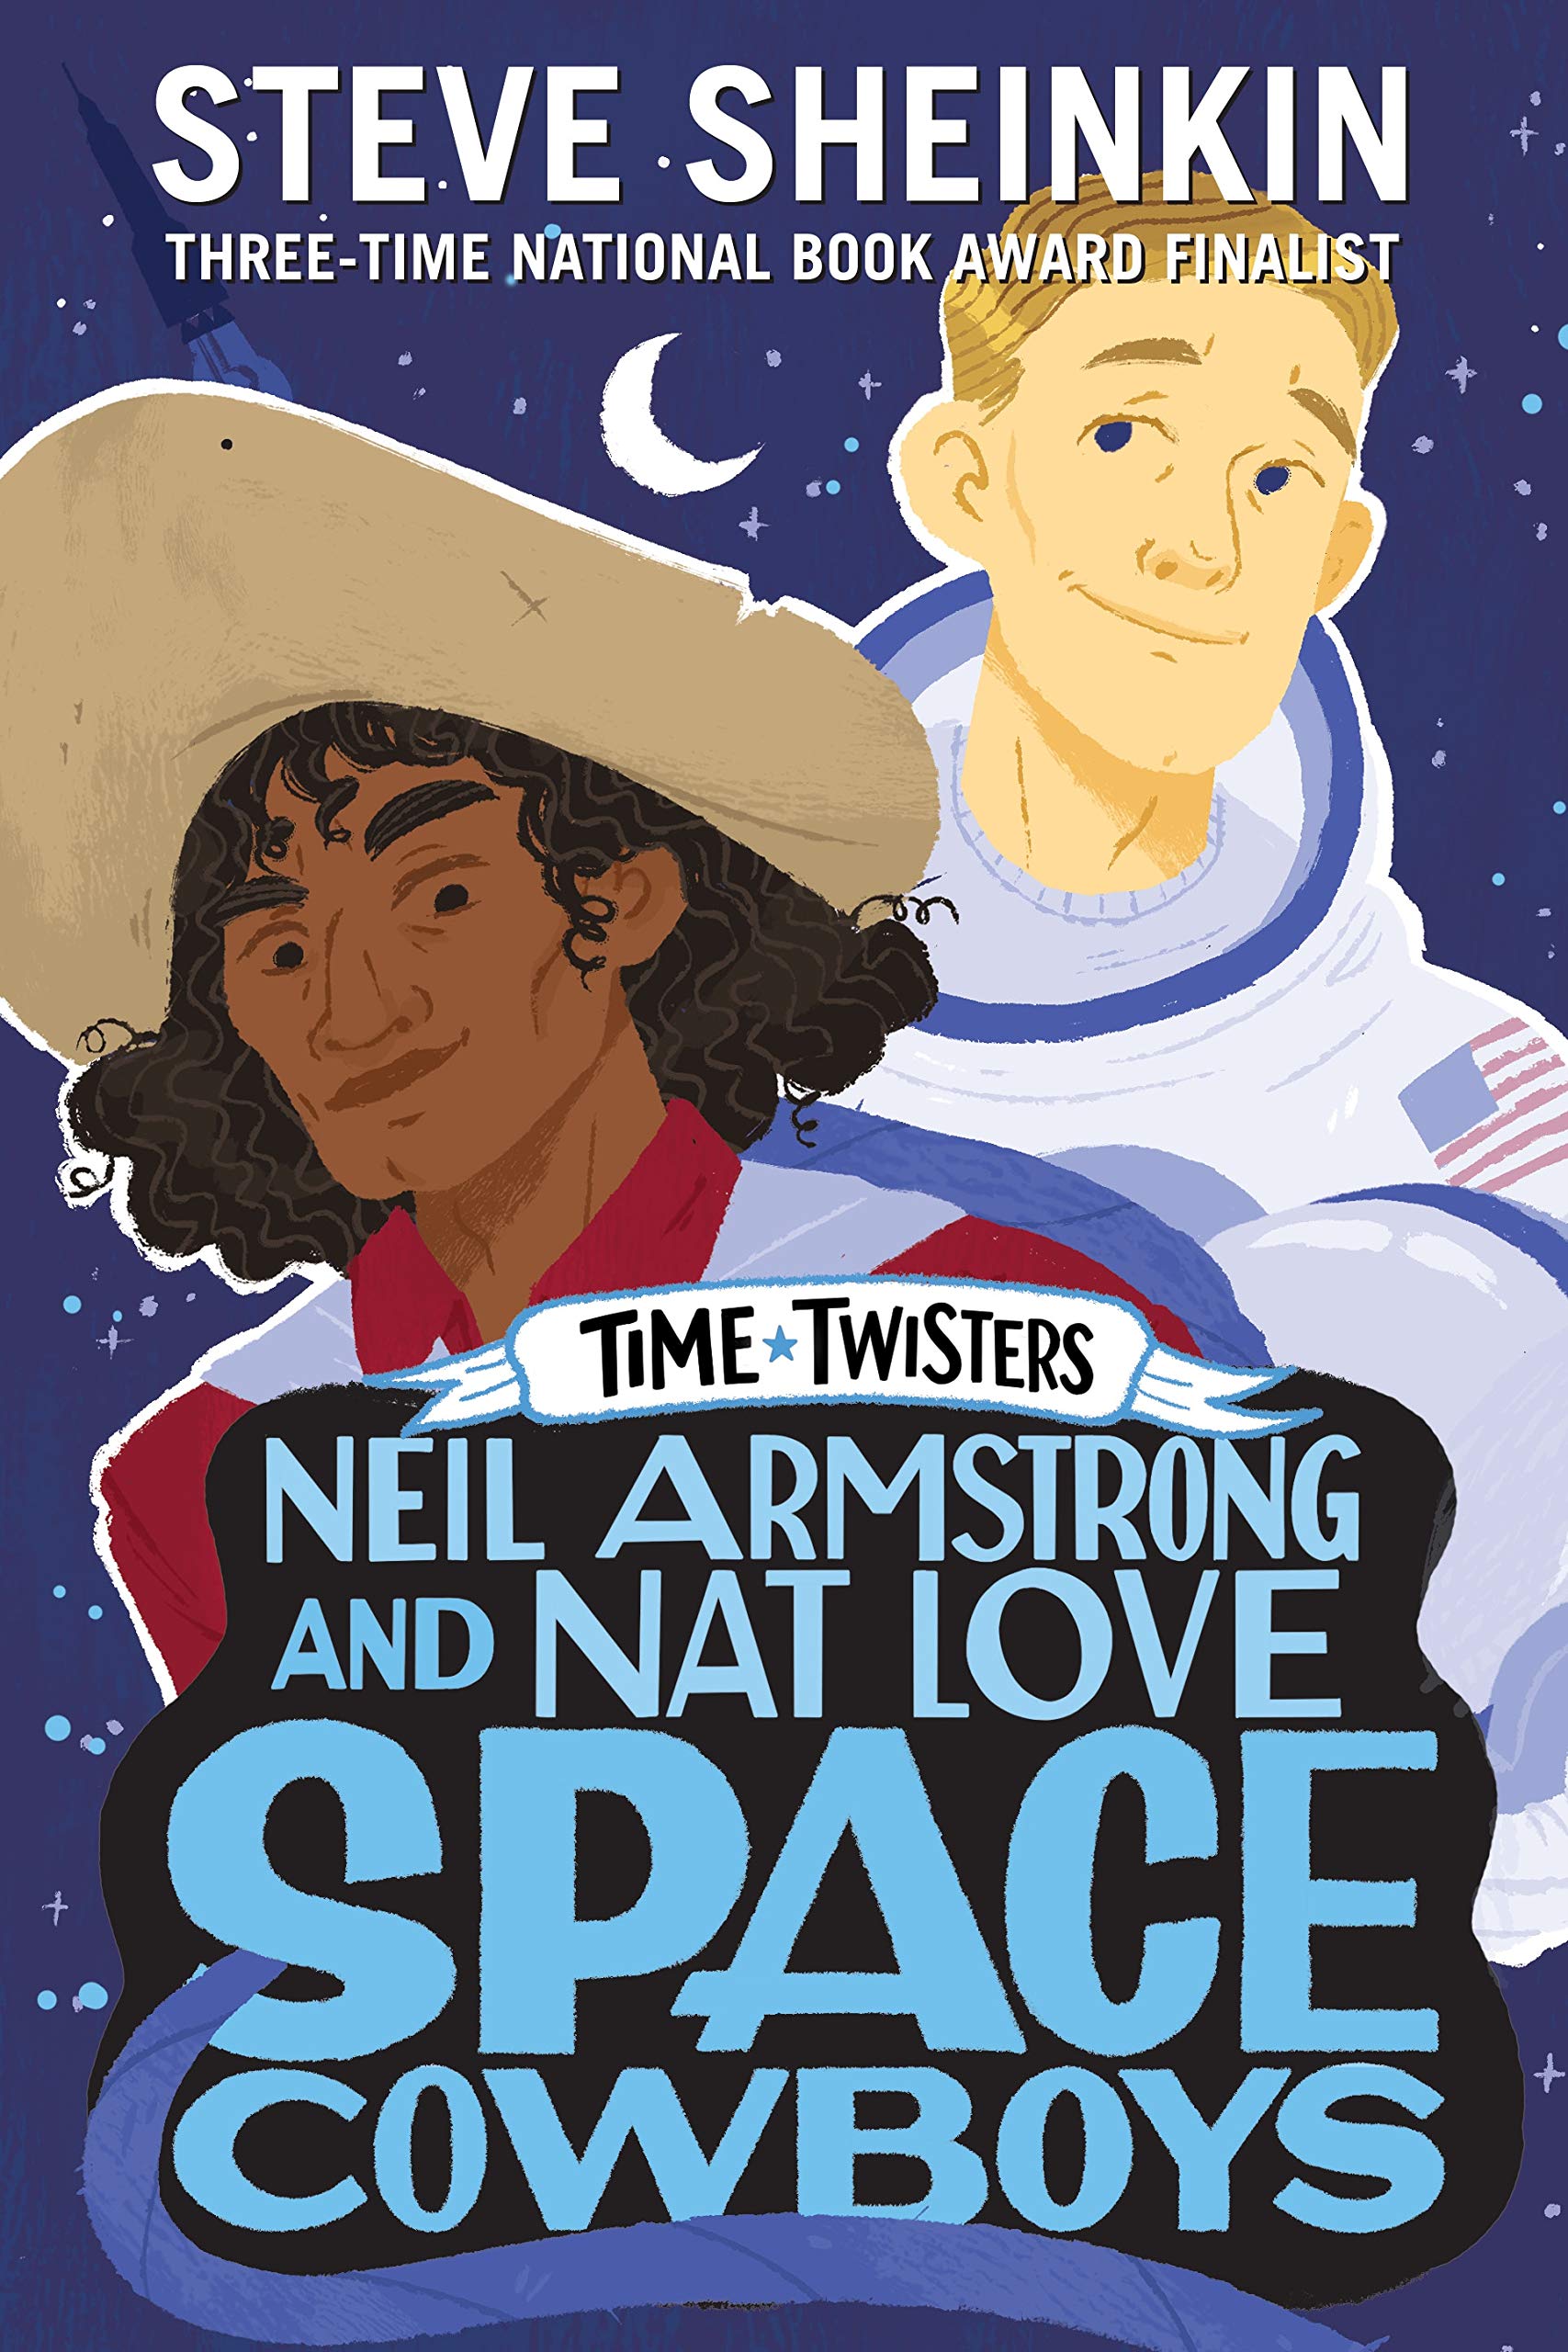 Image of Book cover of Time Twisters: Neil Armstrong and Nat Love Space Cowboys by Steve Sheinkin.